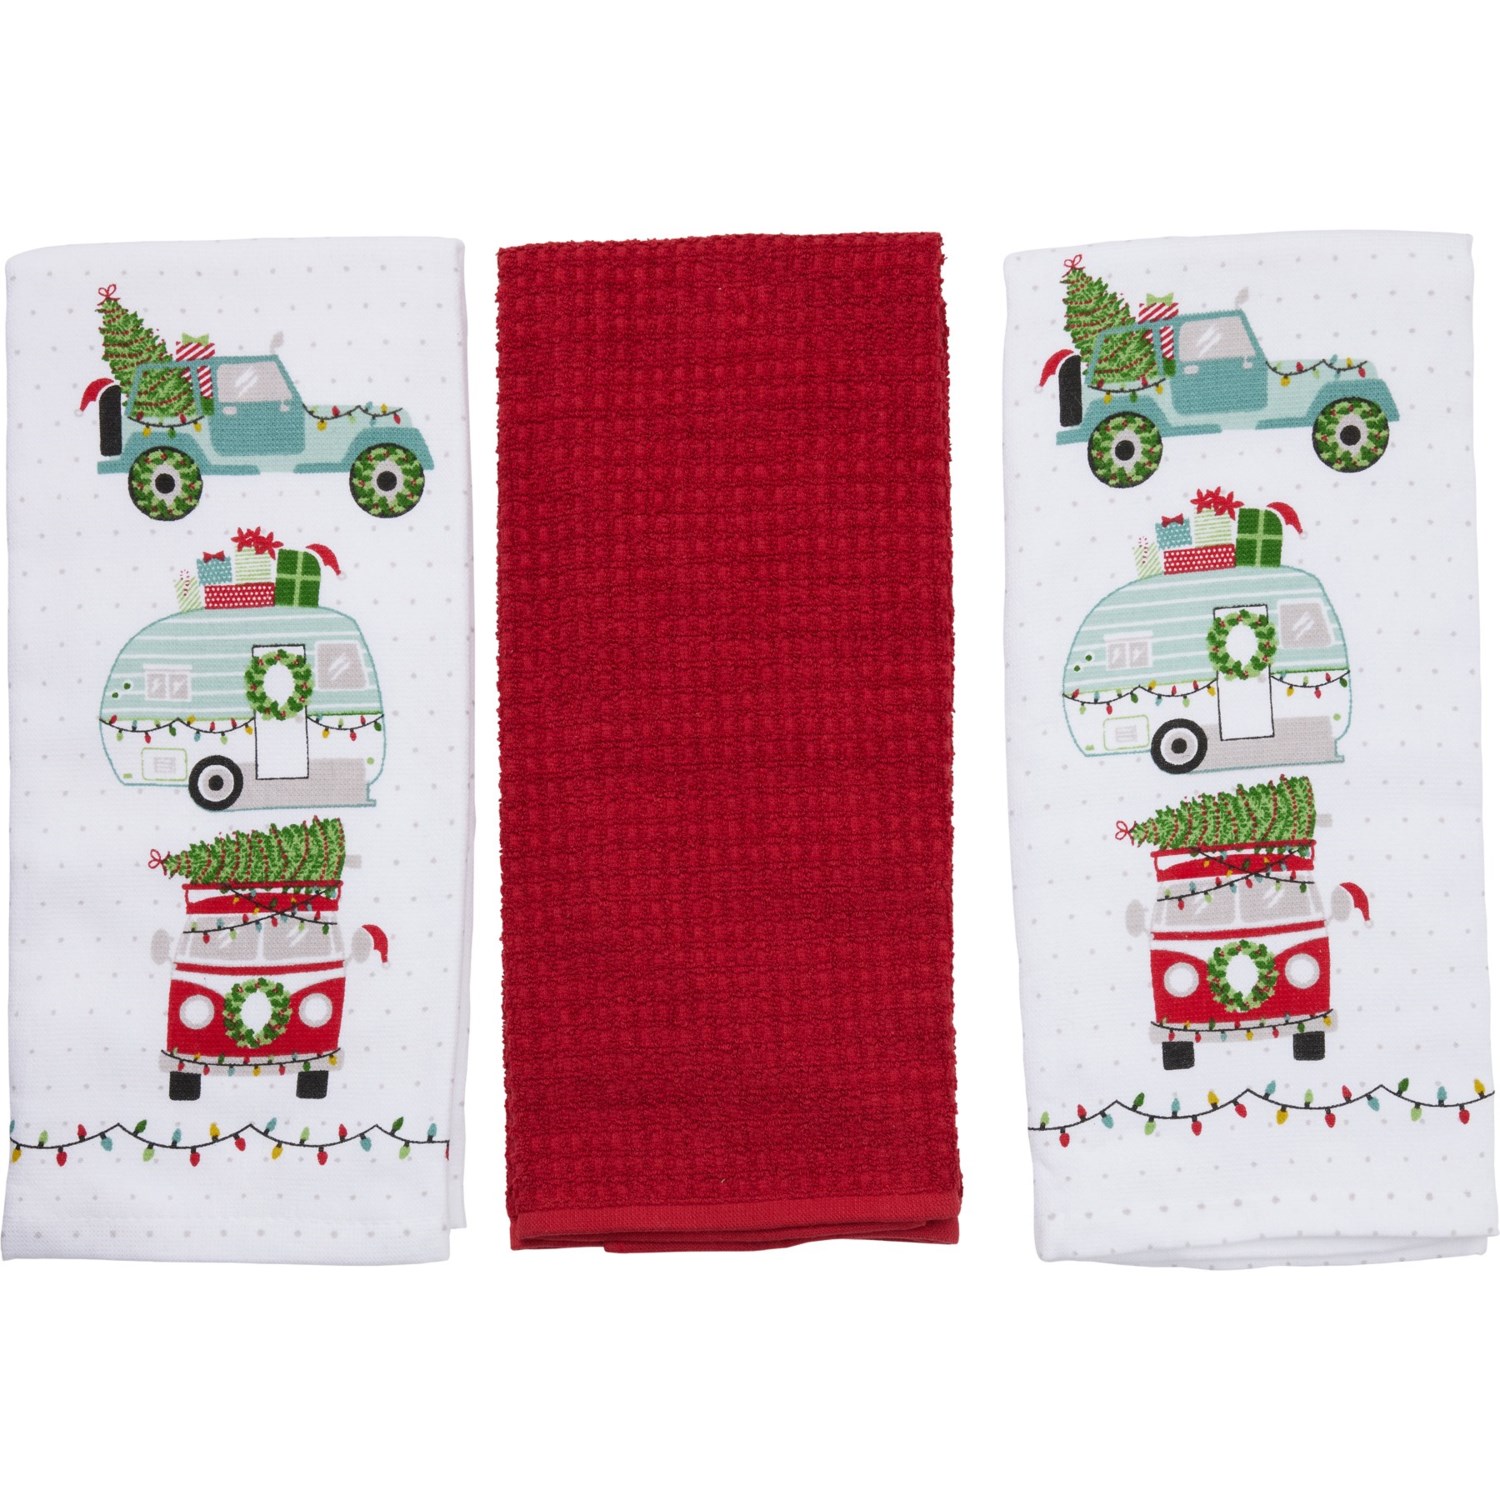 Cynthia Rowley Holiday Road Trip Kitchen Towels - 3-Pack, 18x28” - Save 61%